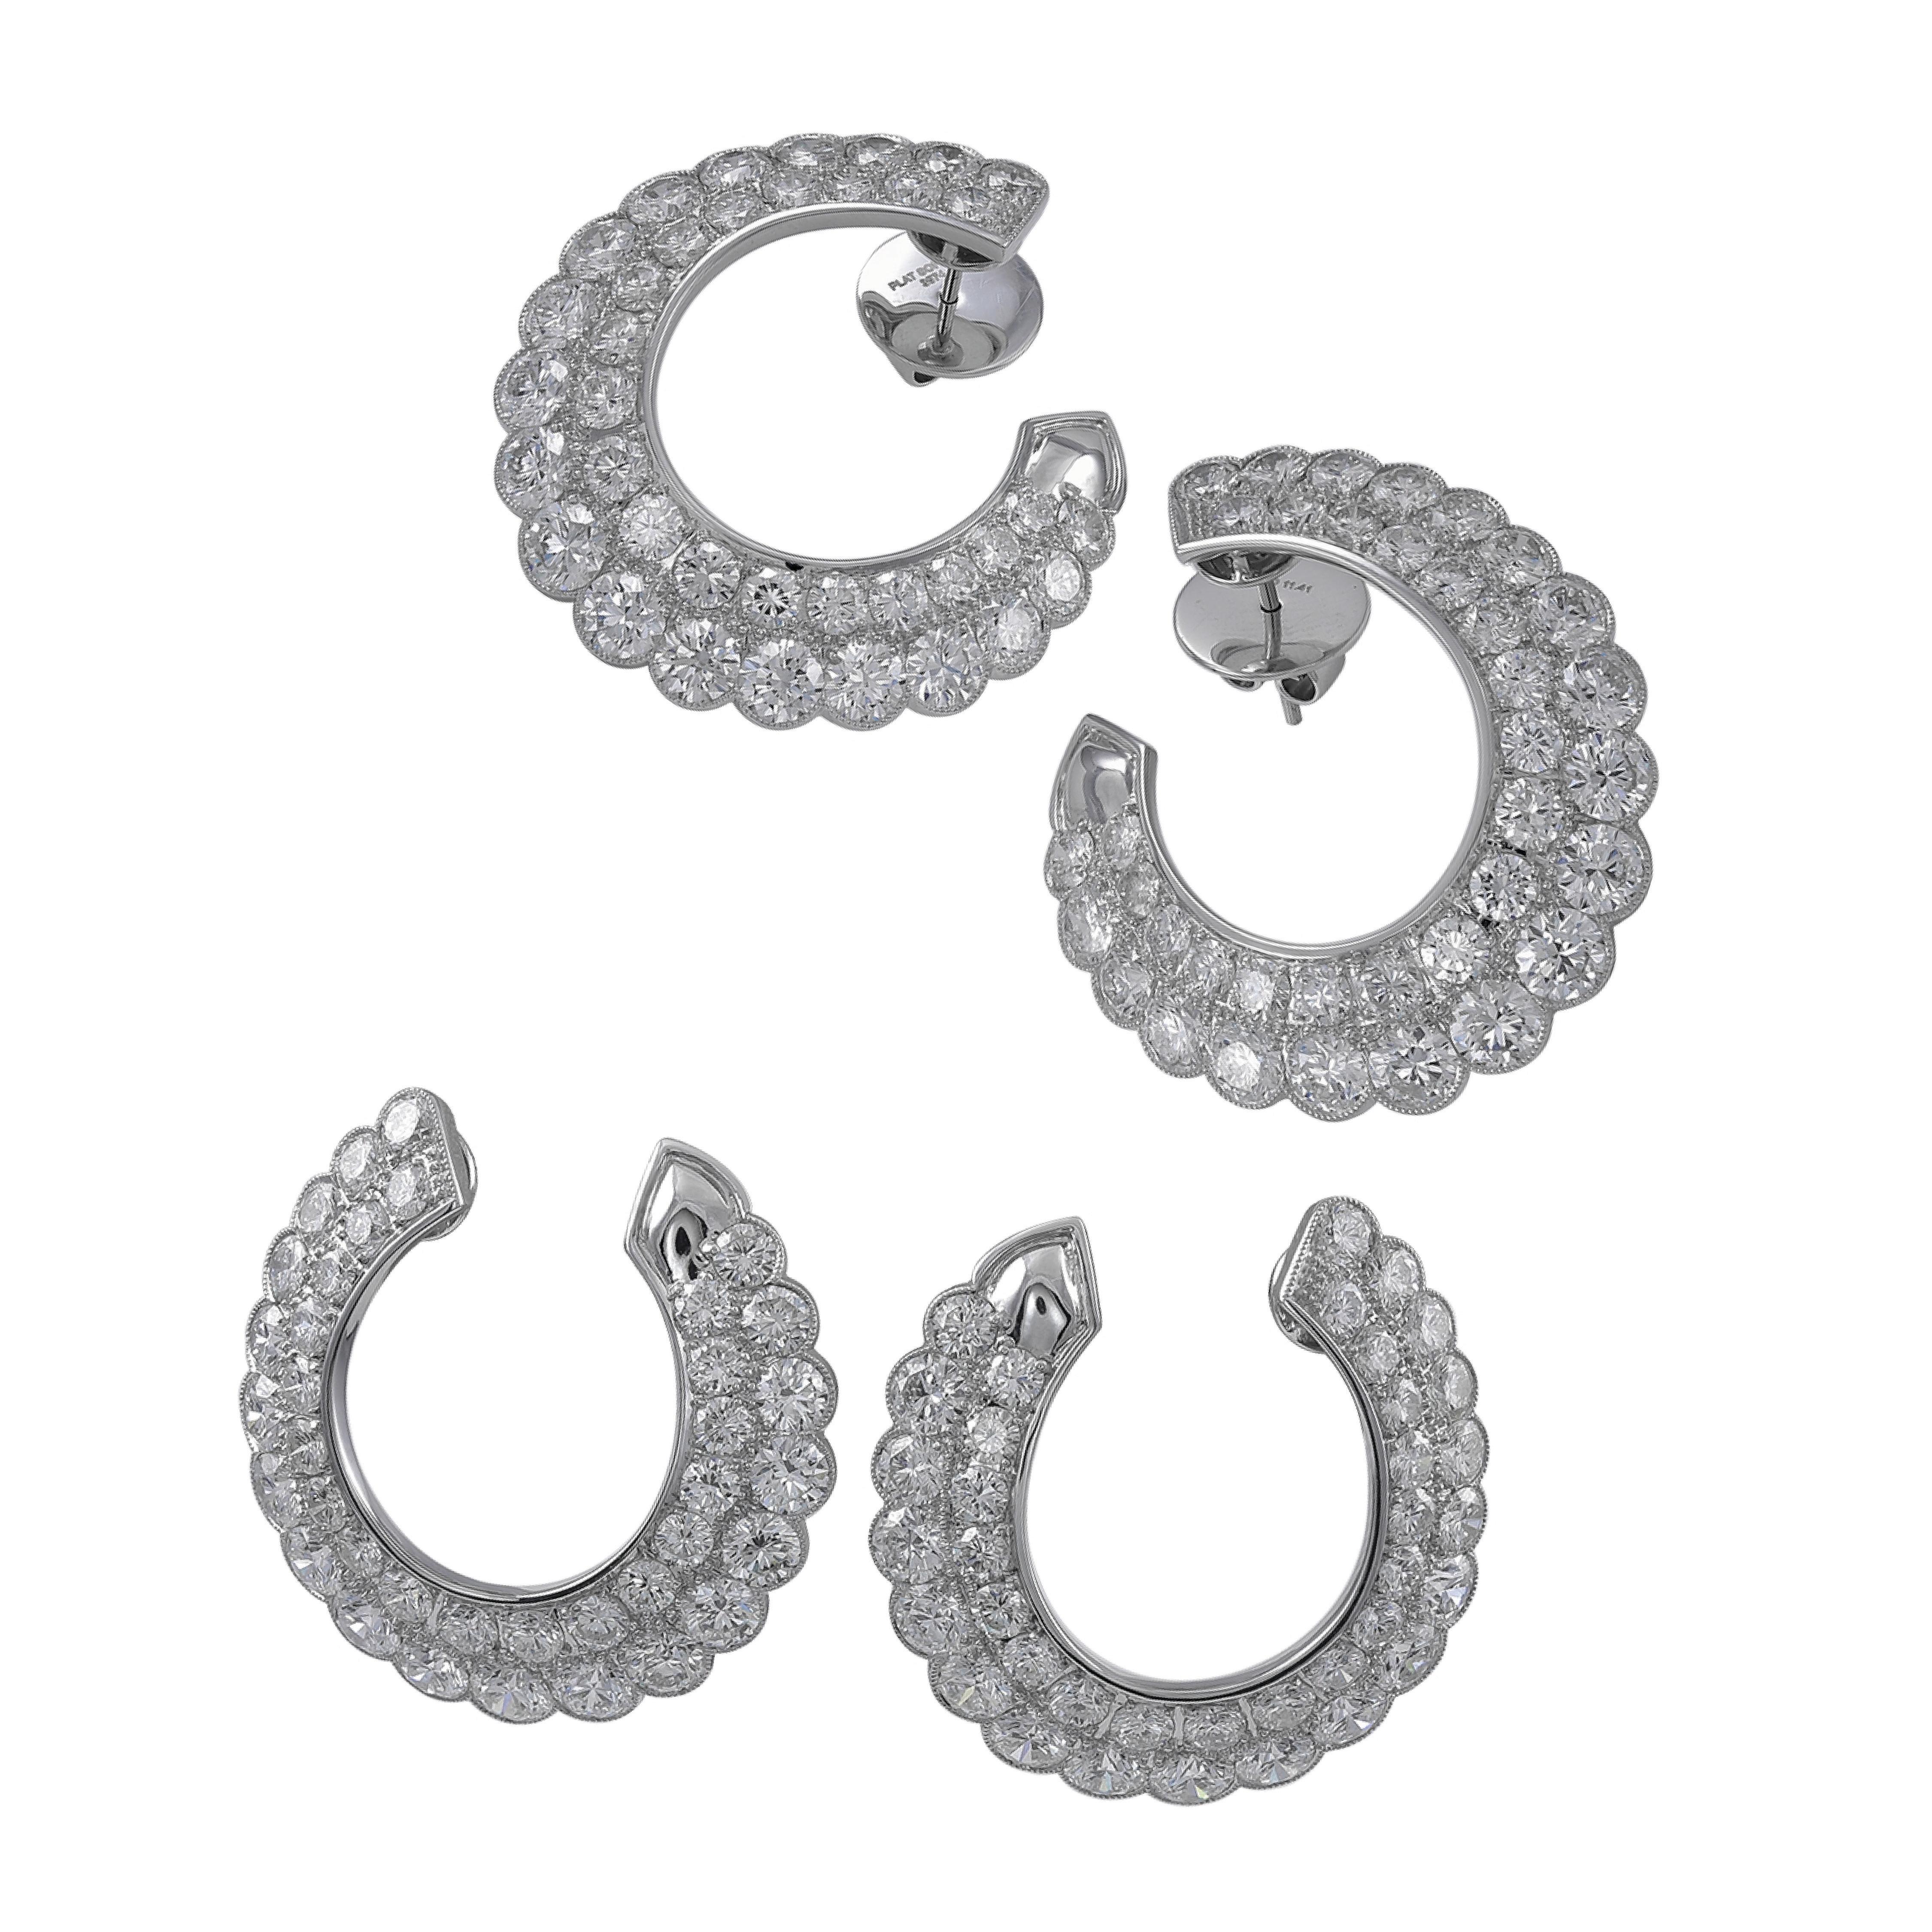 Sophia D. 11.21 Carat Diamond Platinum Earrings In New Condition For Sale In New York, NY